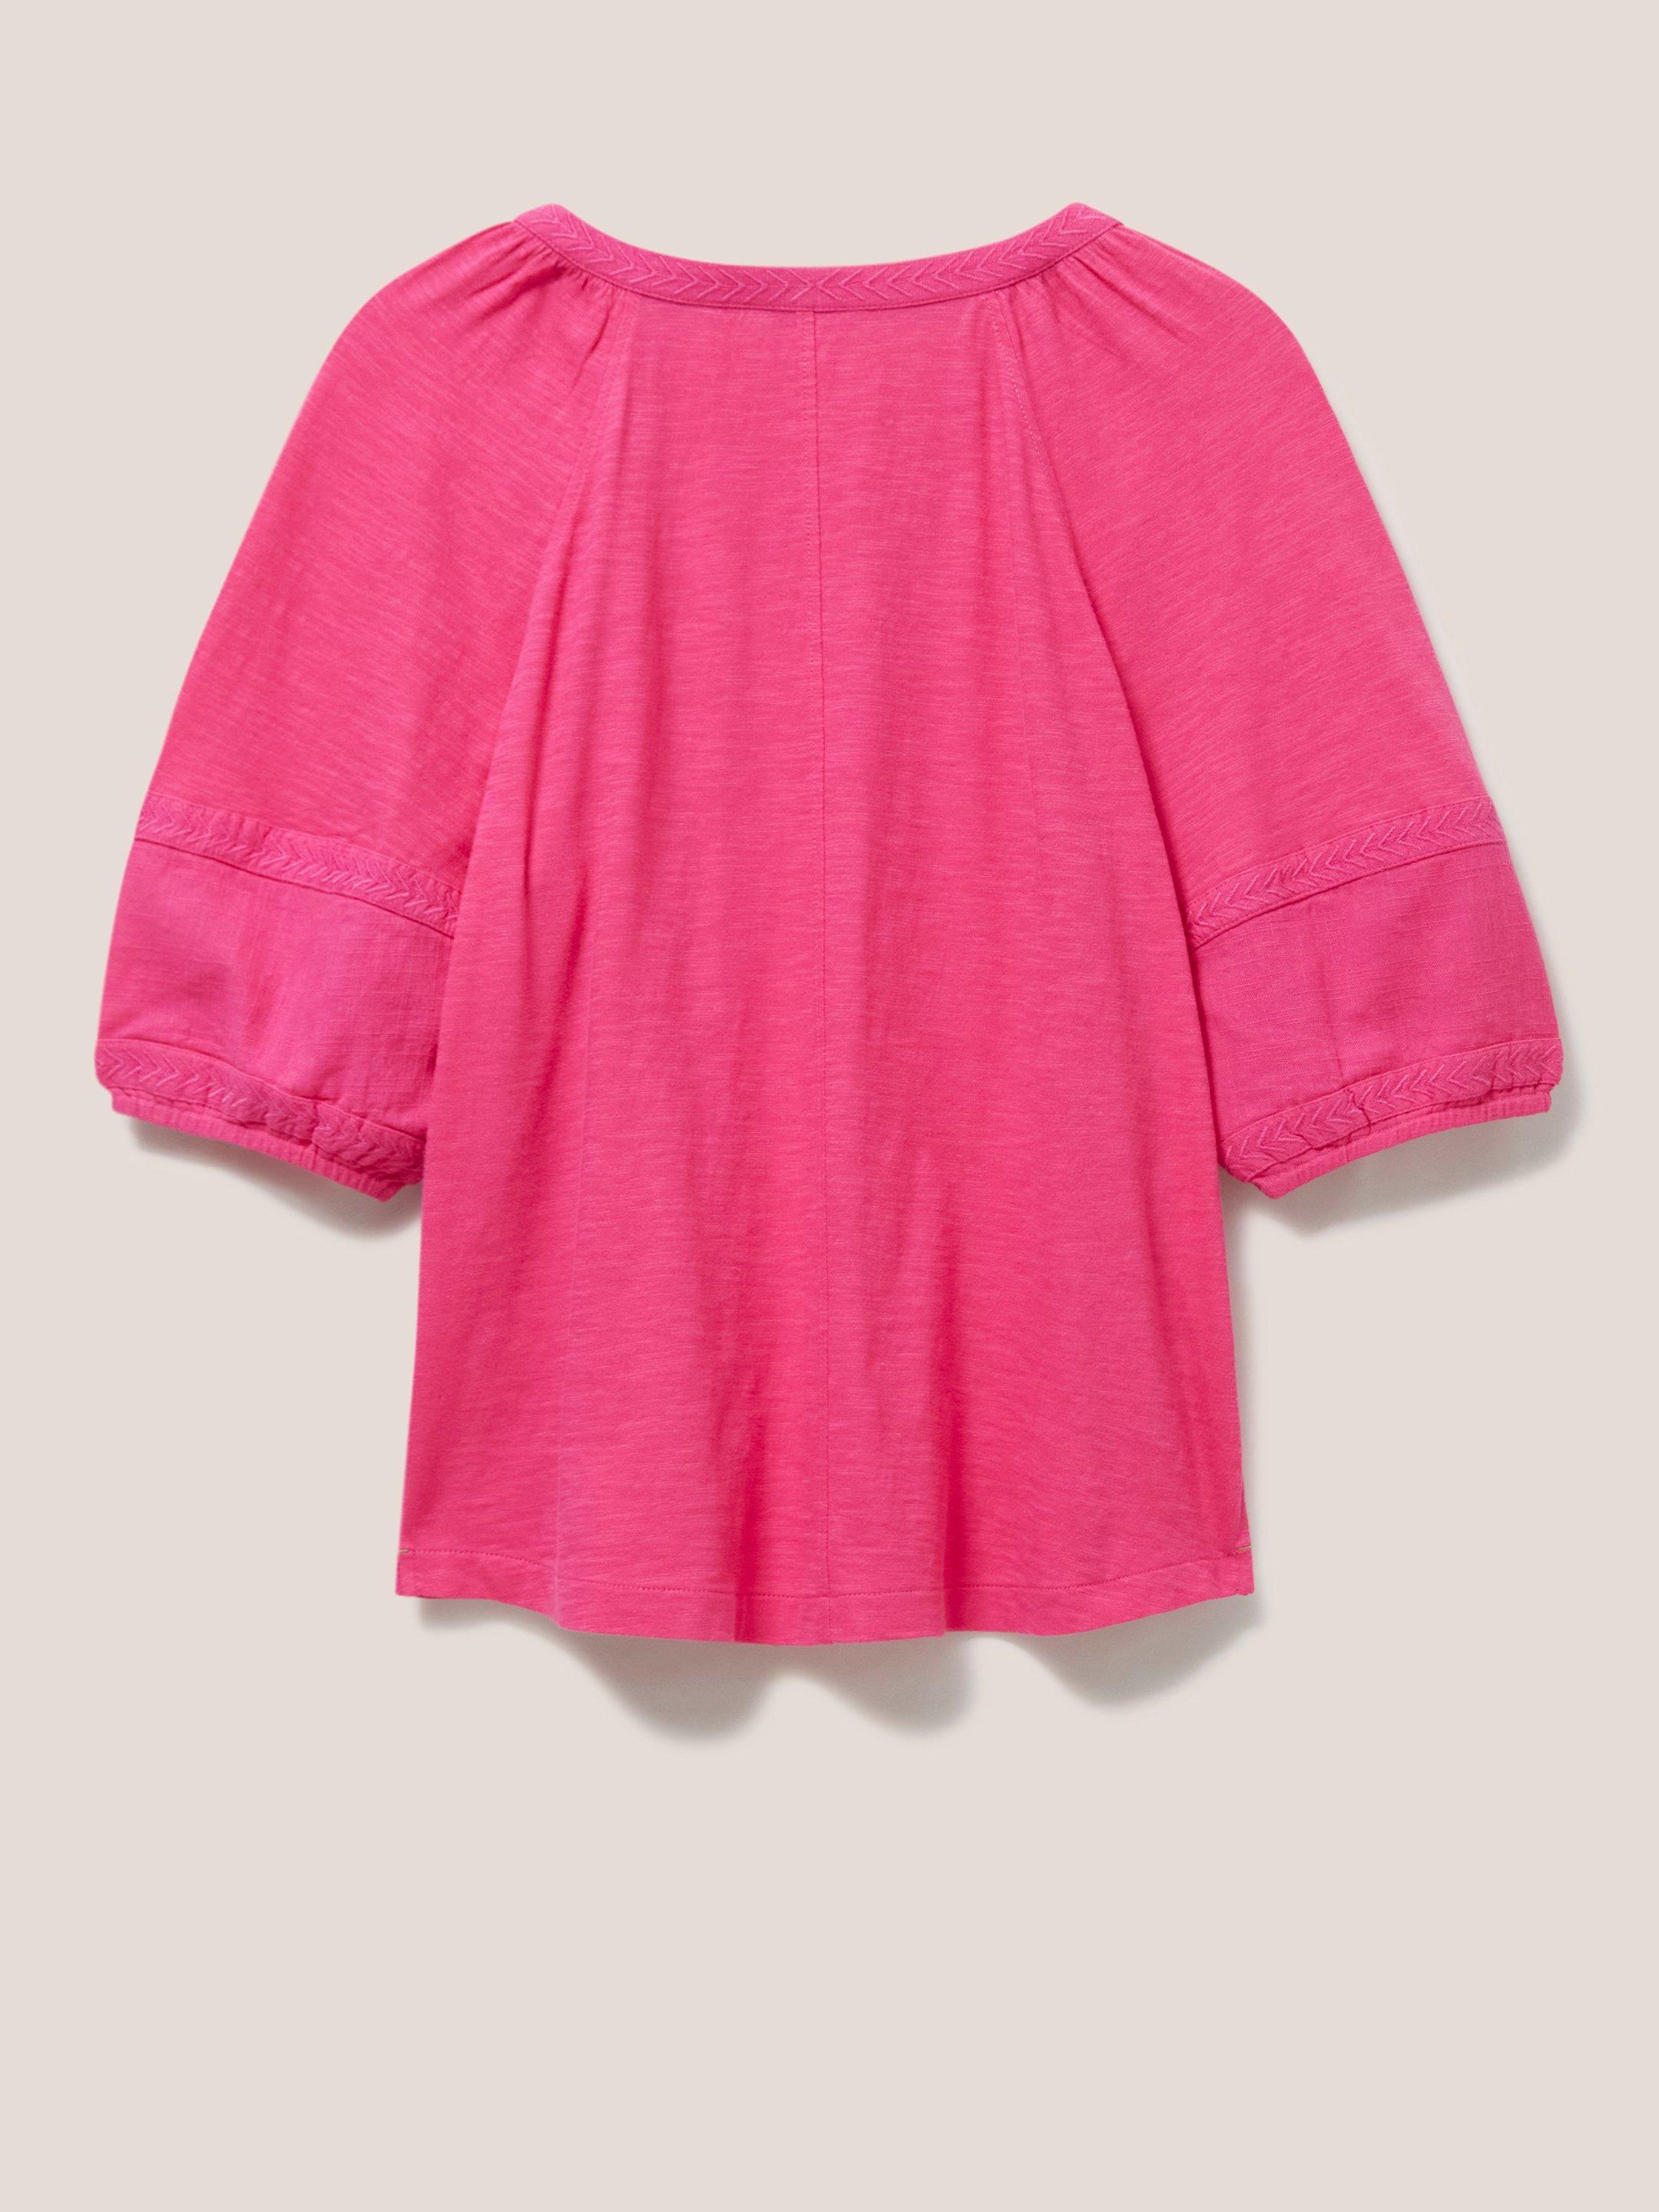 PHOEBE JERSEY MIX TOP in BRT PINK - FLAT BACK